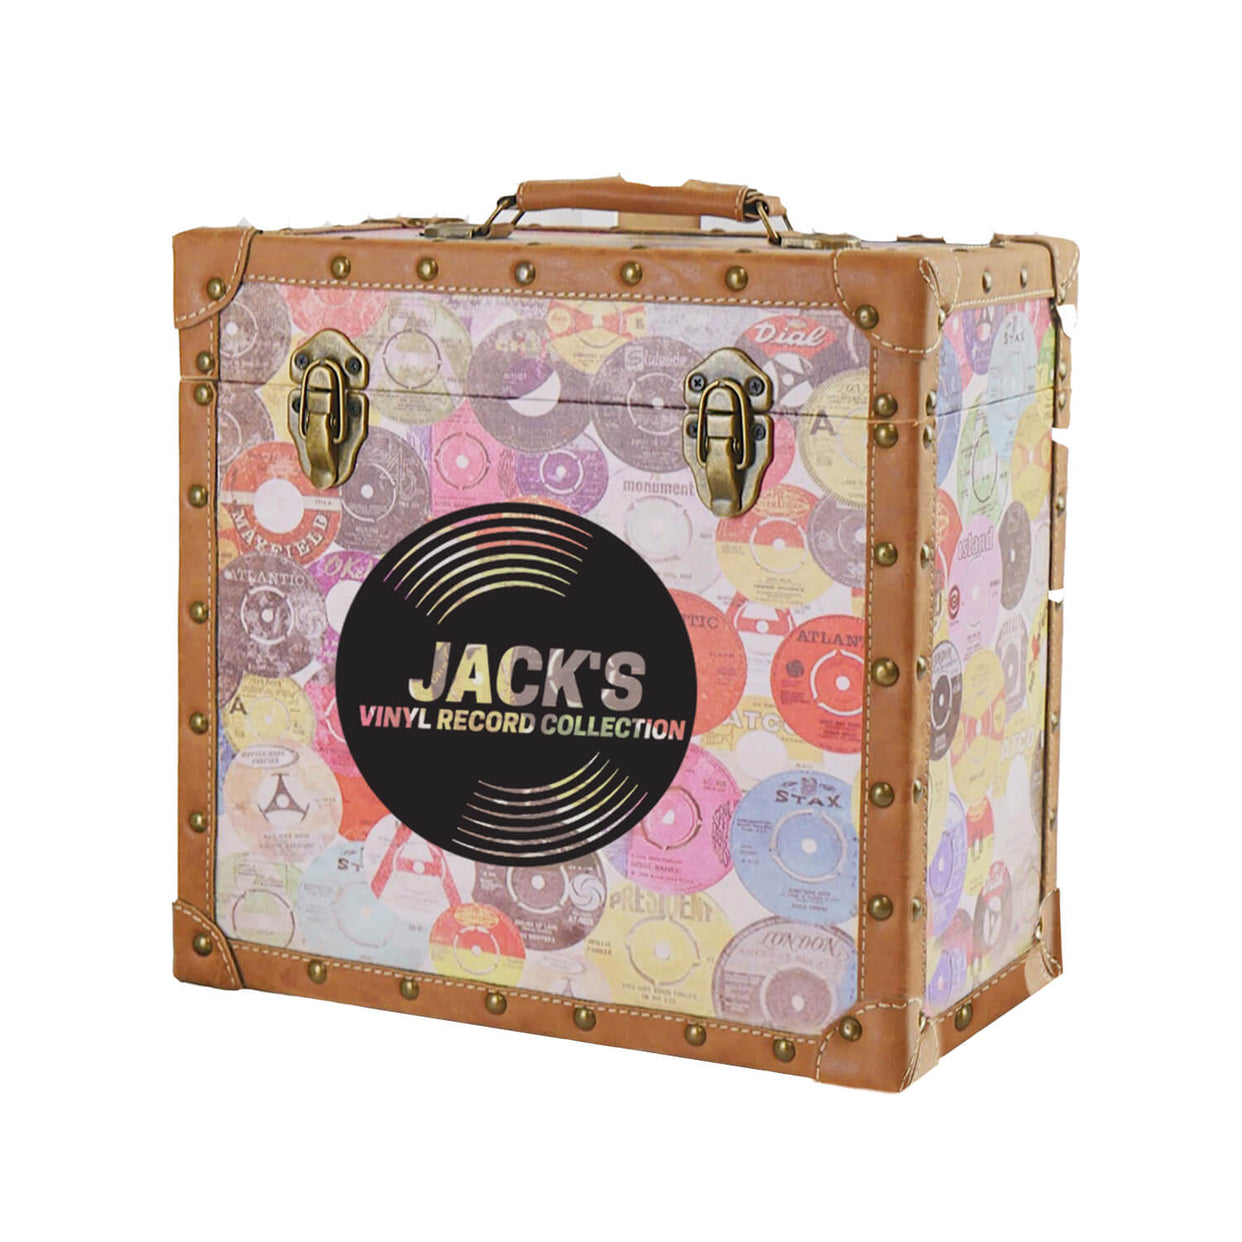 Personalised Music Record Vinyl Storage Box - 12 inch - Retro finish - Stores up to 50 records